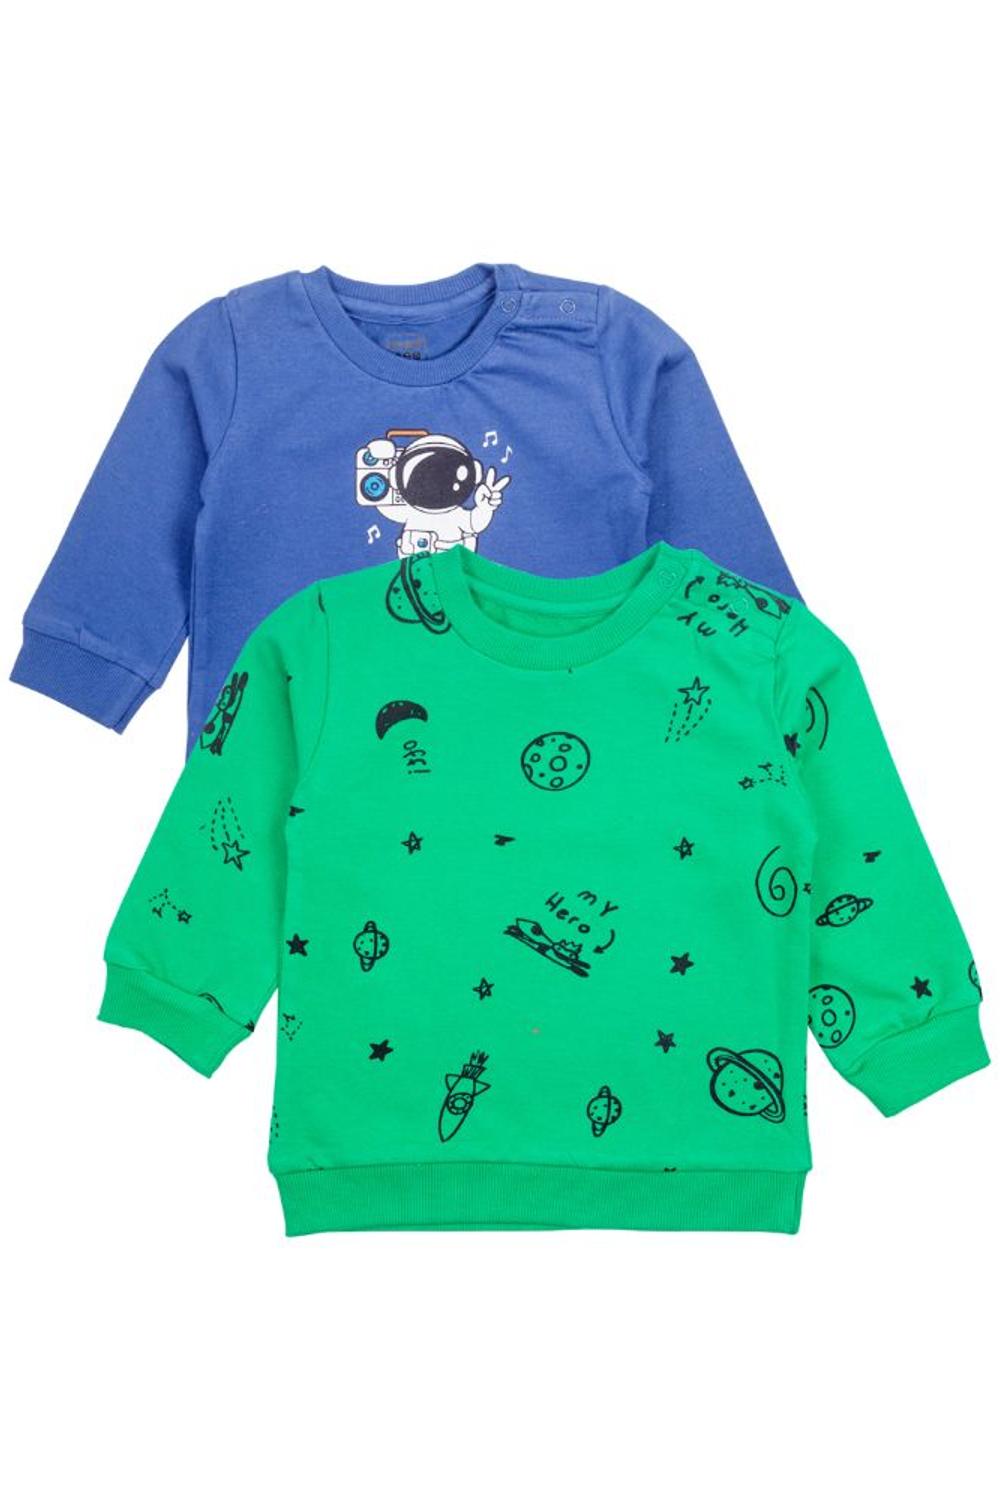 Mee Mee Boys Pack Of 2 T-Shirt Blue &Amp Green